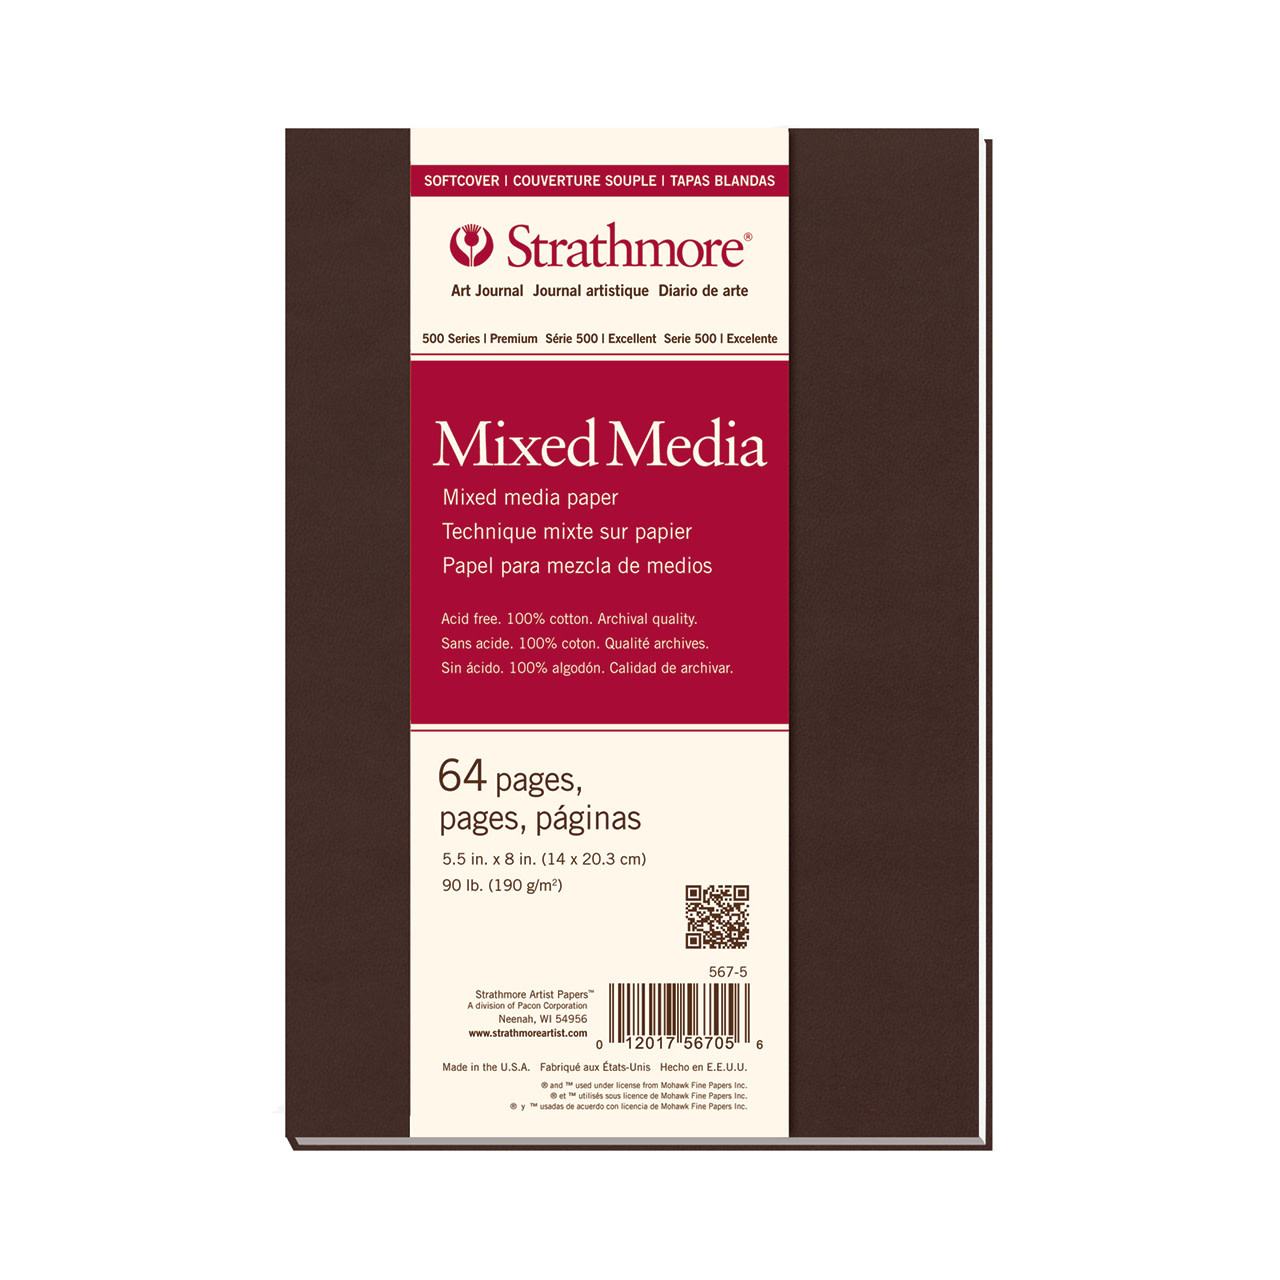 Strathmore Softcover Mixed Media Art Journals 500 Series